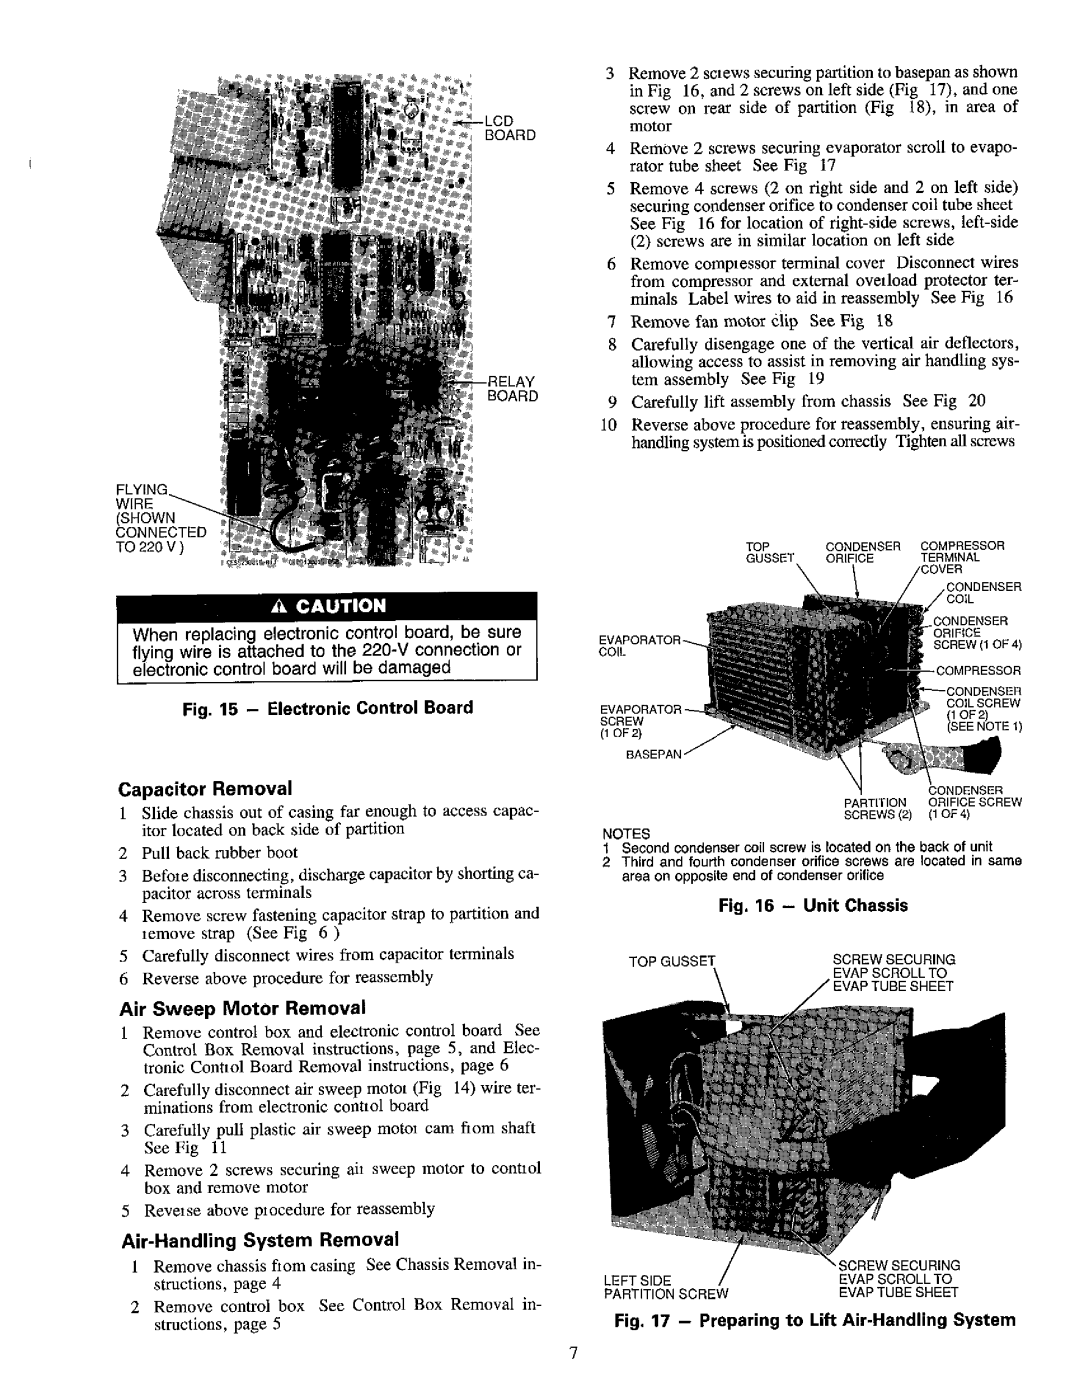 Carrier 1995 manual 